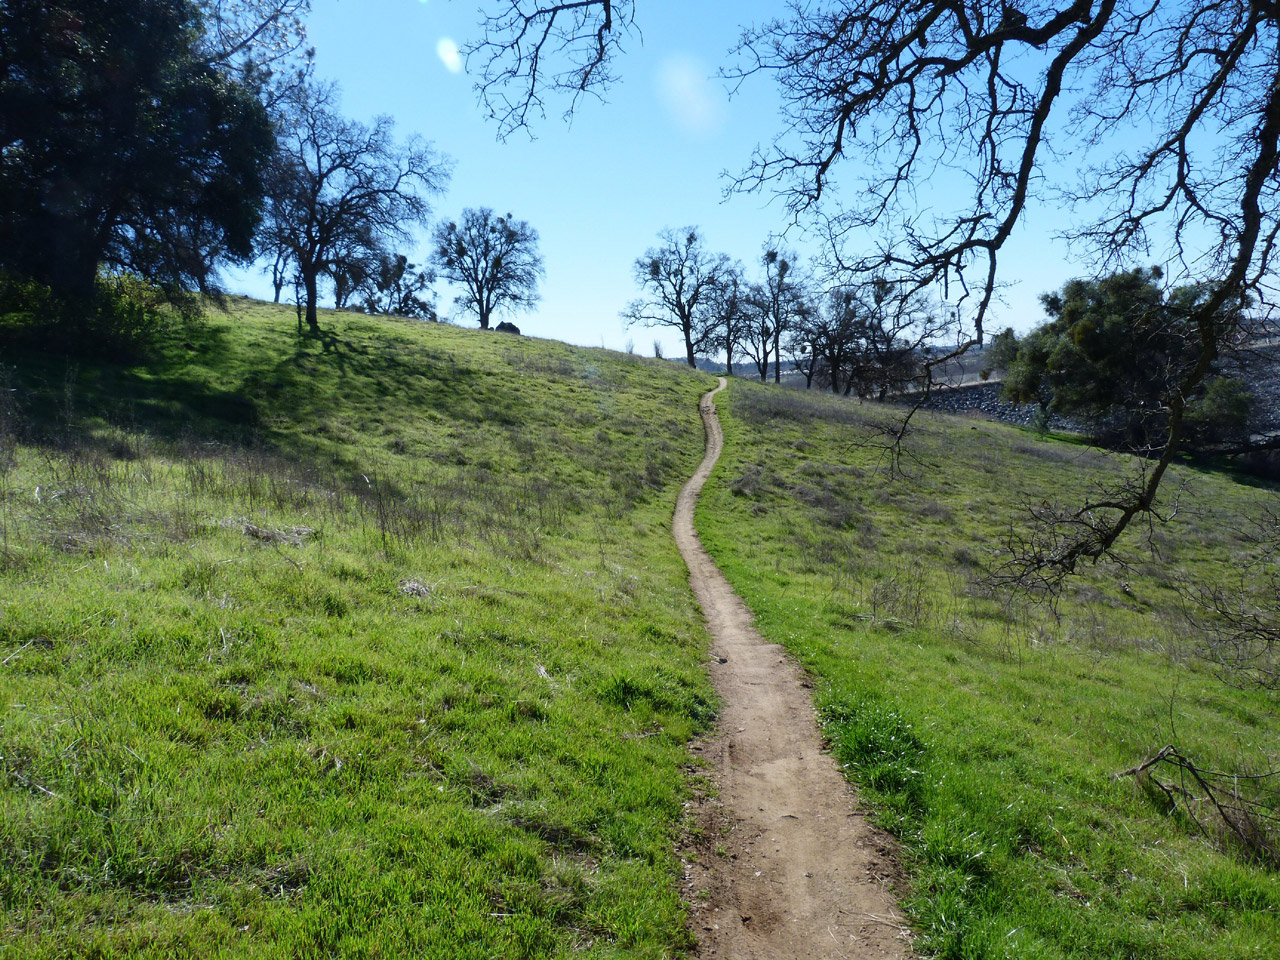 Hilly hiking path